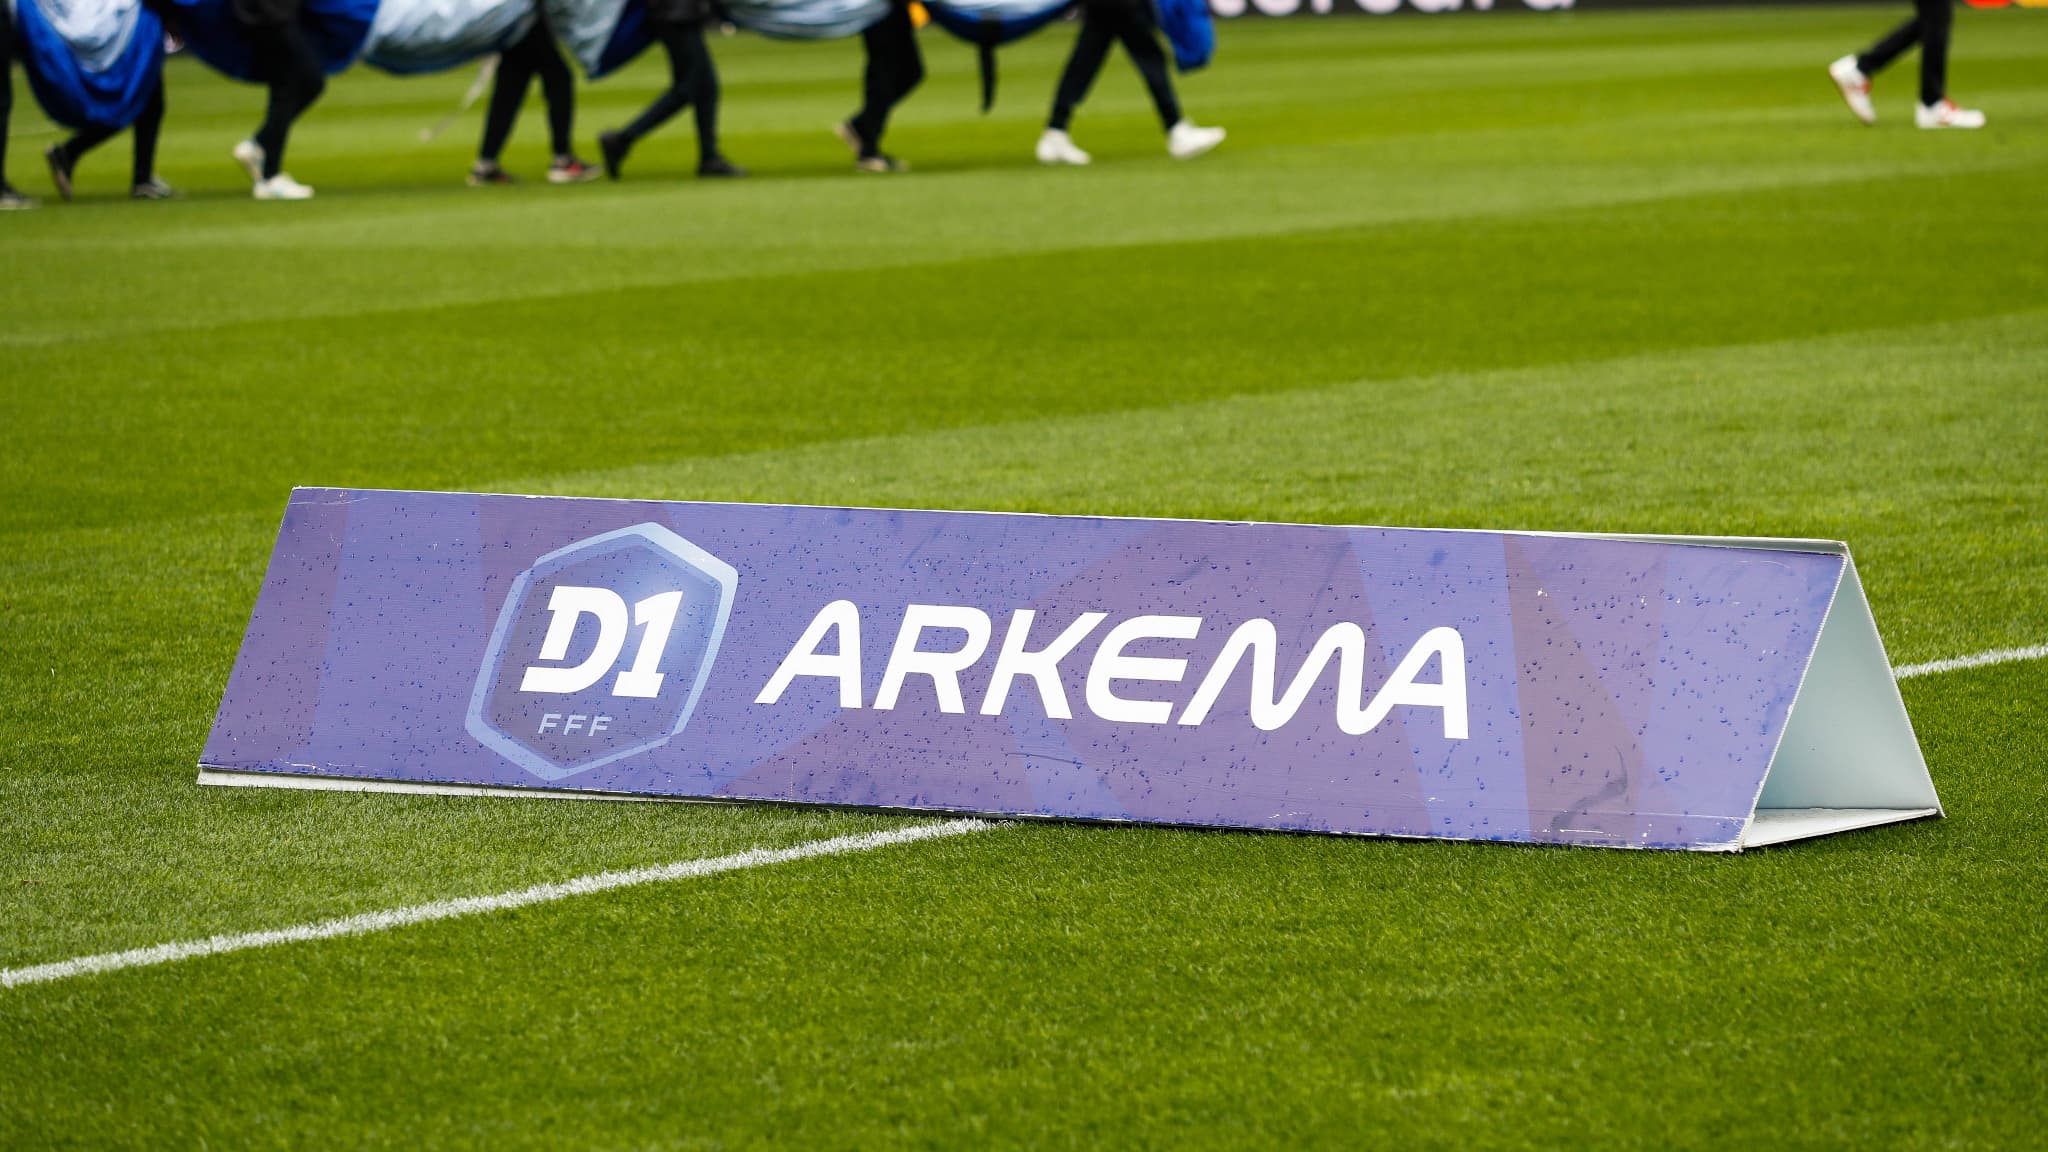 After an exceptional season, the RC Strasbourg players moved up to D1 Arkema